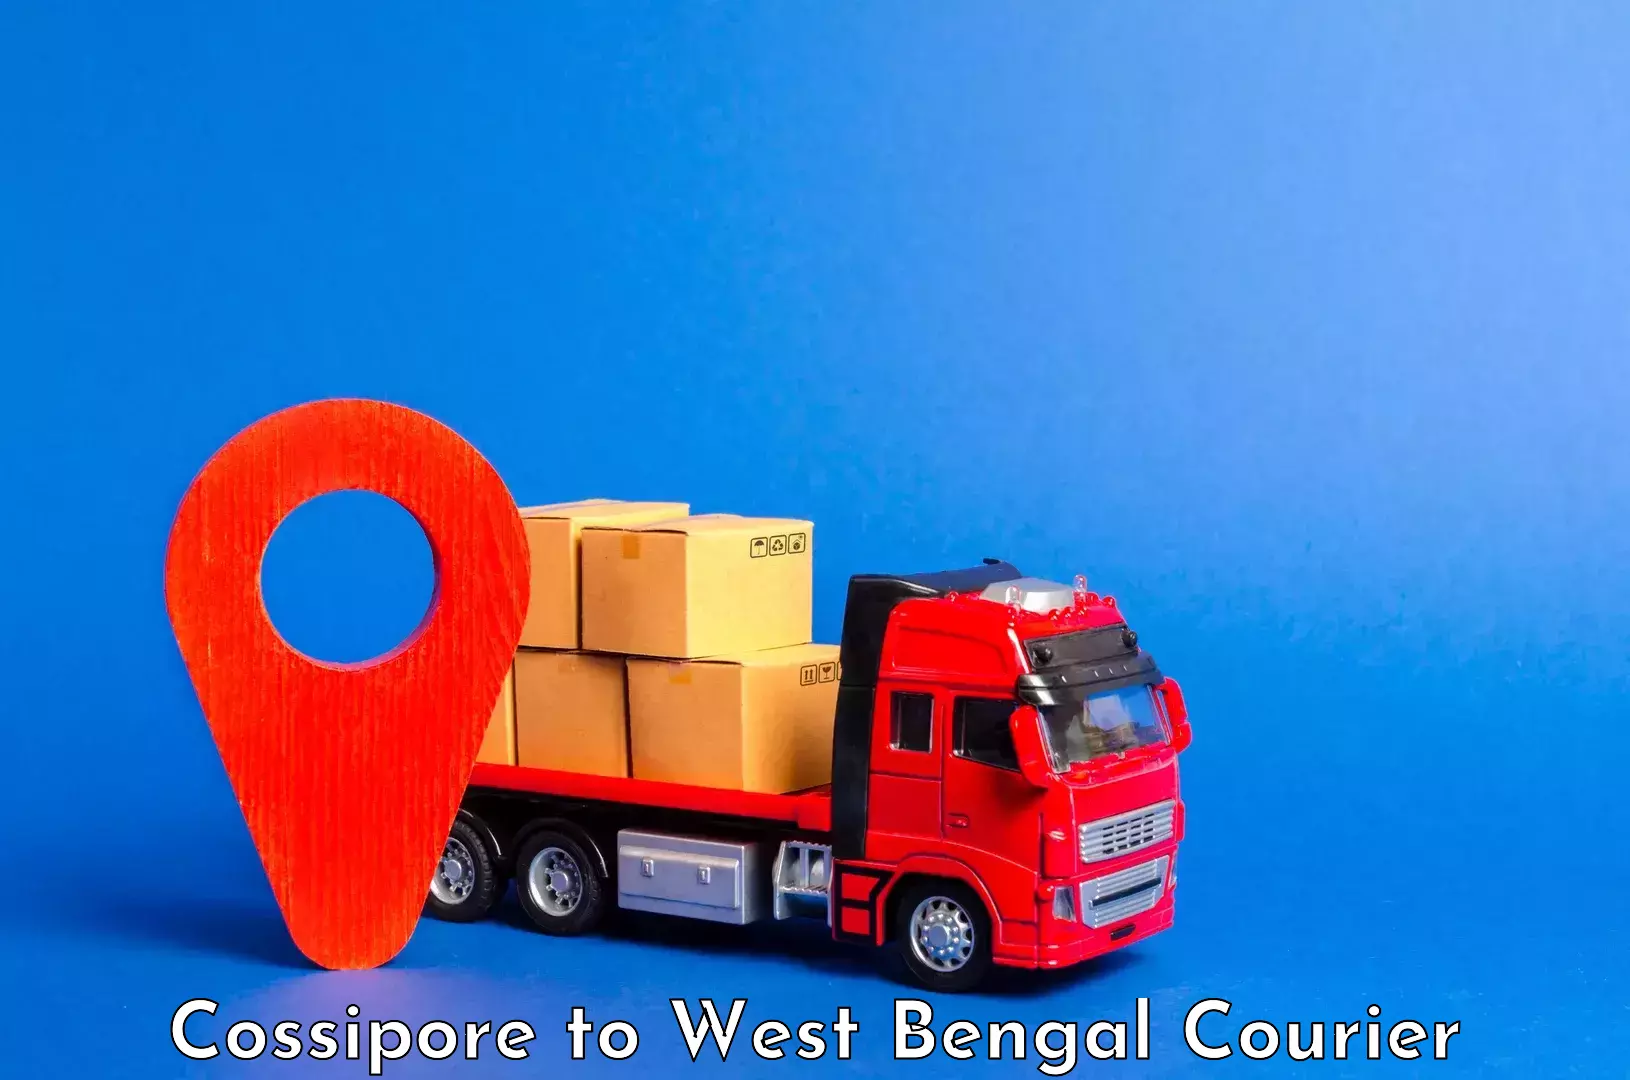 Instant baggage transport quote Cossipore to West Bengal